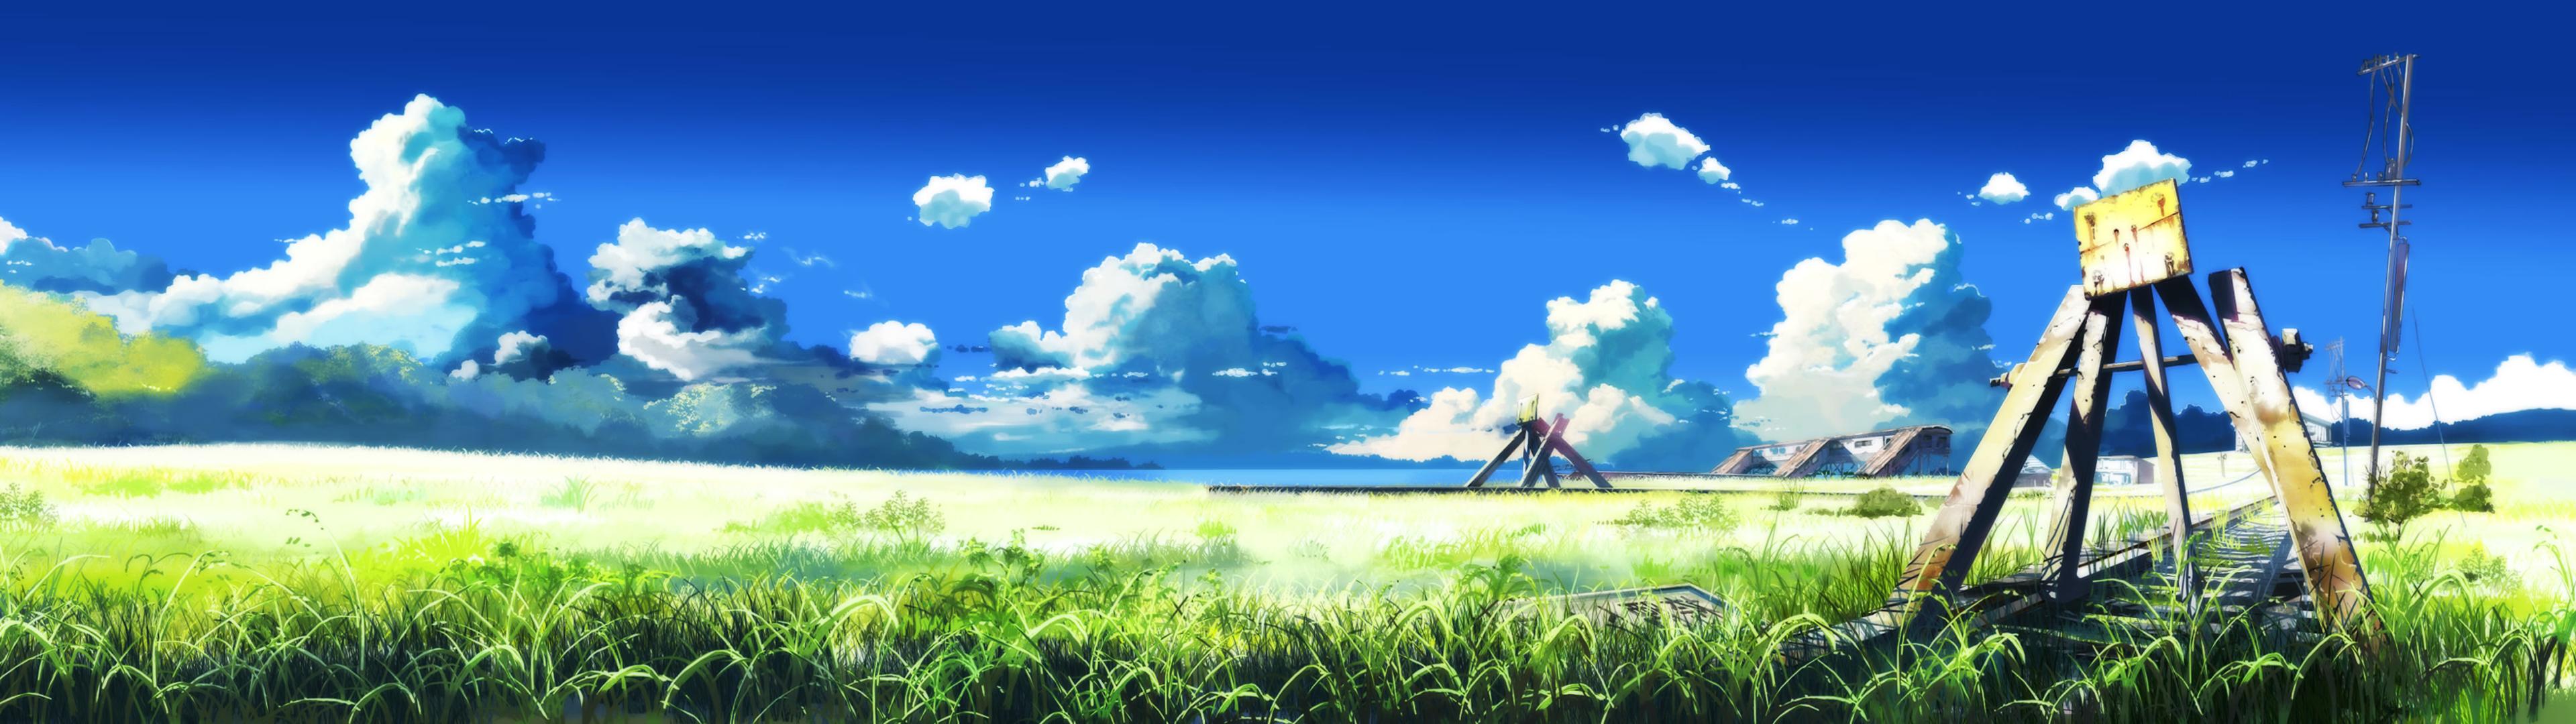 Anime Group XP - Other & Anime Background Wallpapers on Desktop Nexus  (Image 238718)